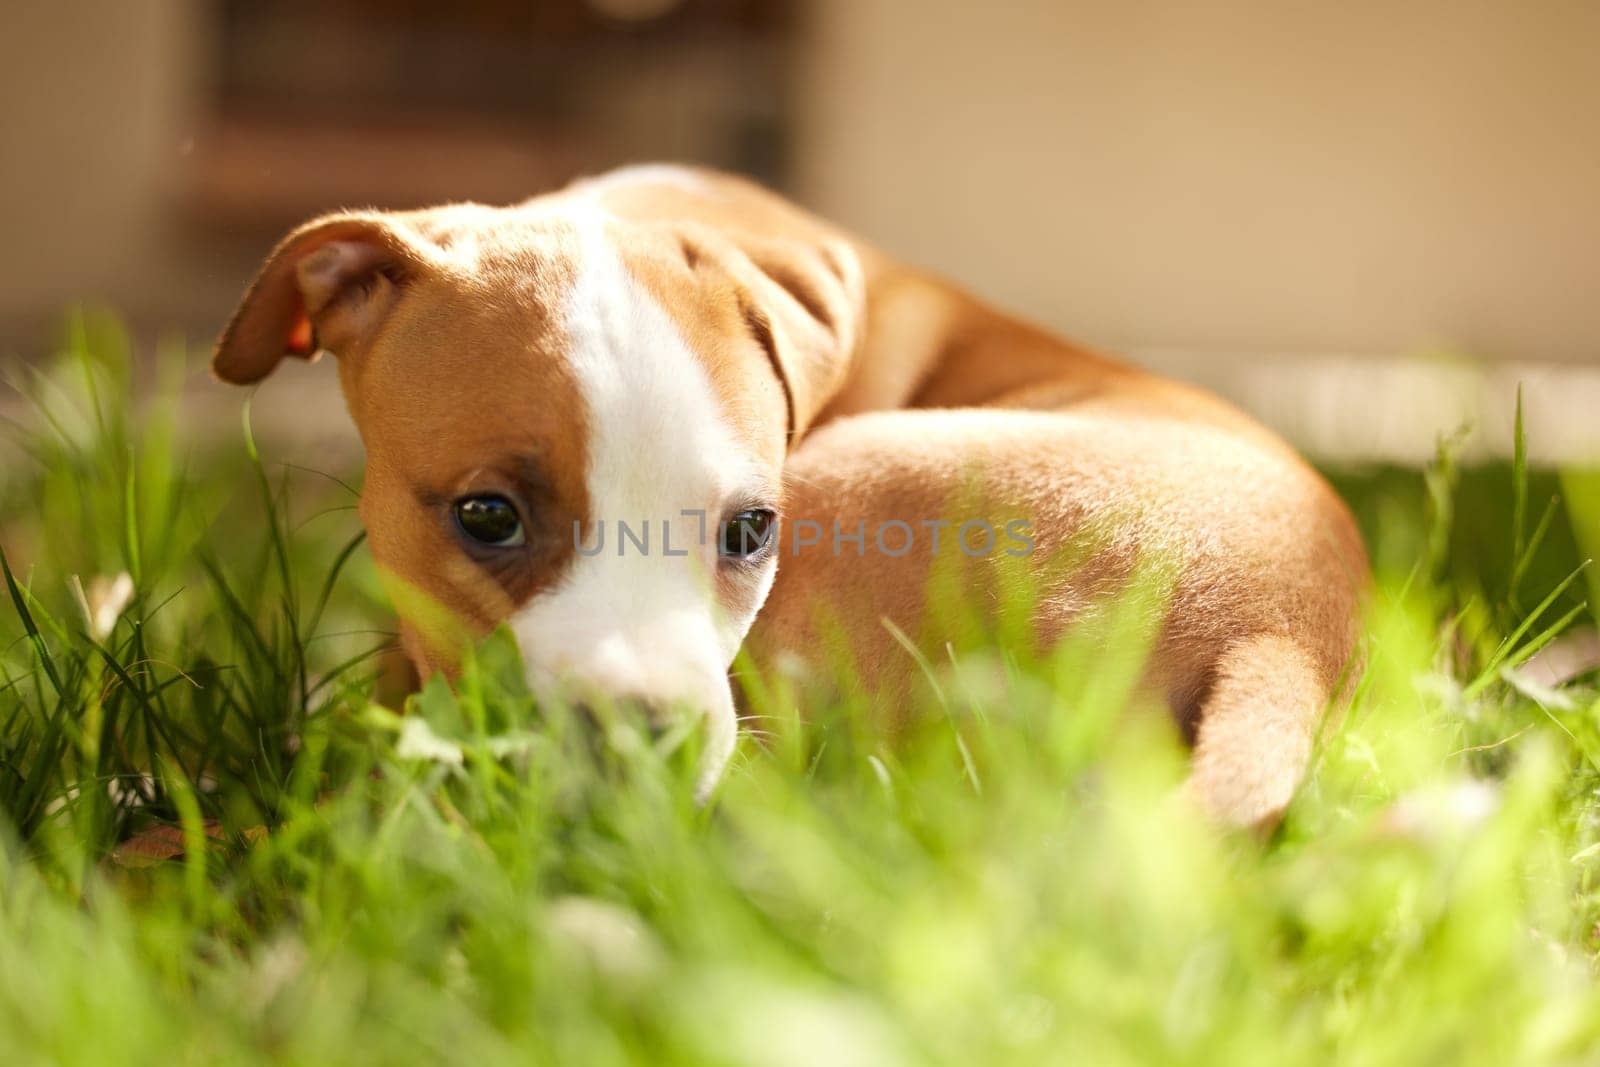 Grass, dog and portrait of shy puppy in backyard for adoption, rescue shelter and animal care. Cute, pets and hiding pitbull outdoors for playing, resting and relax in environment, lawn and nature.